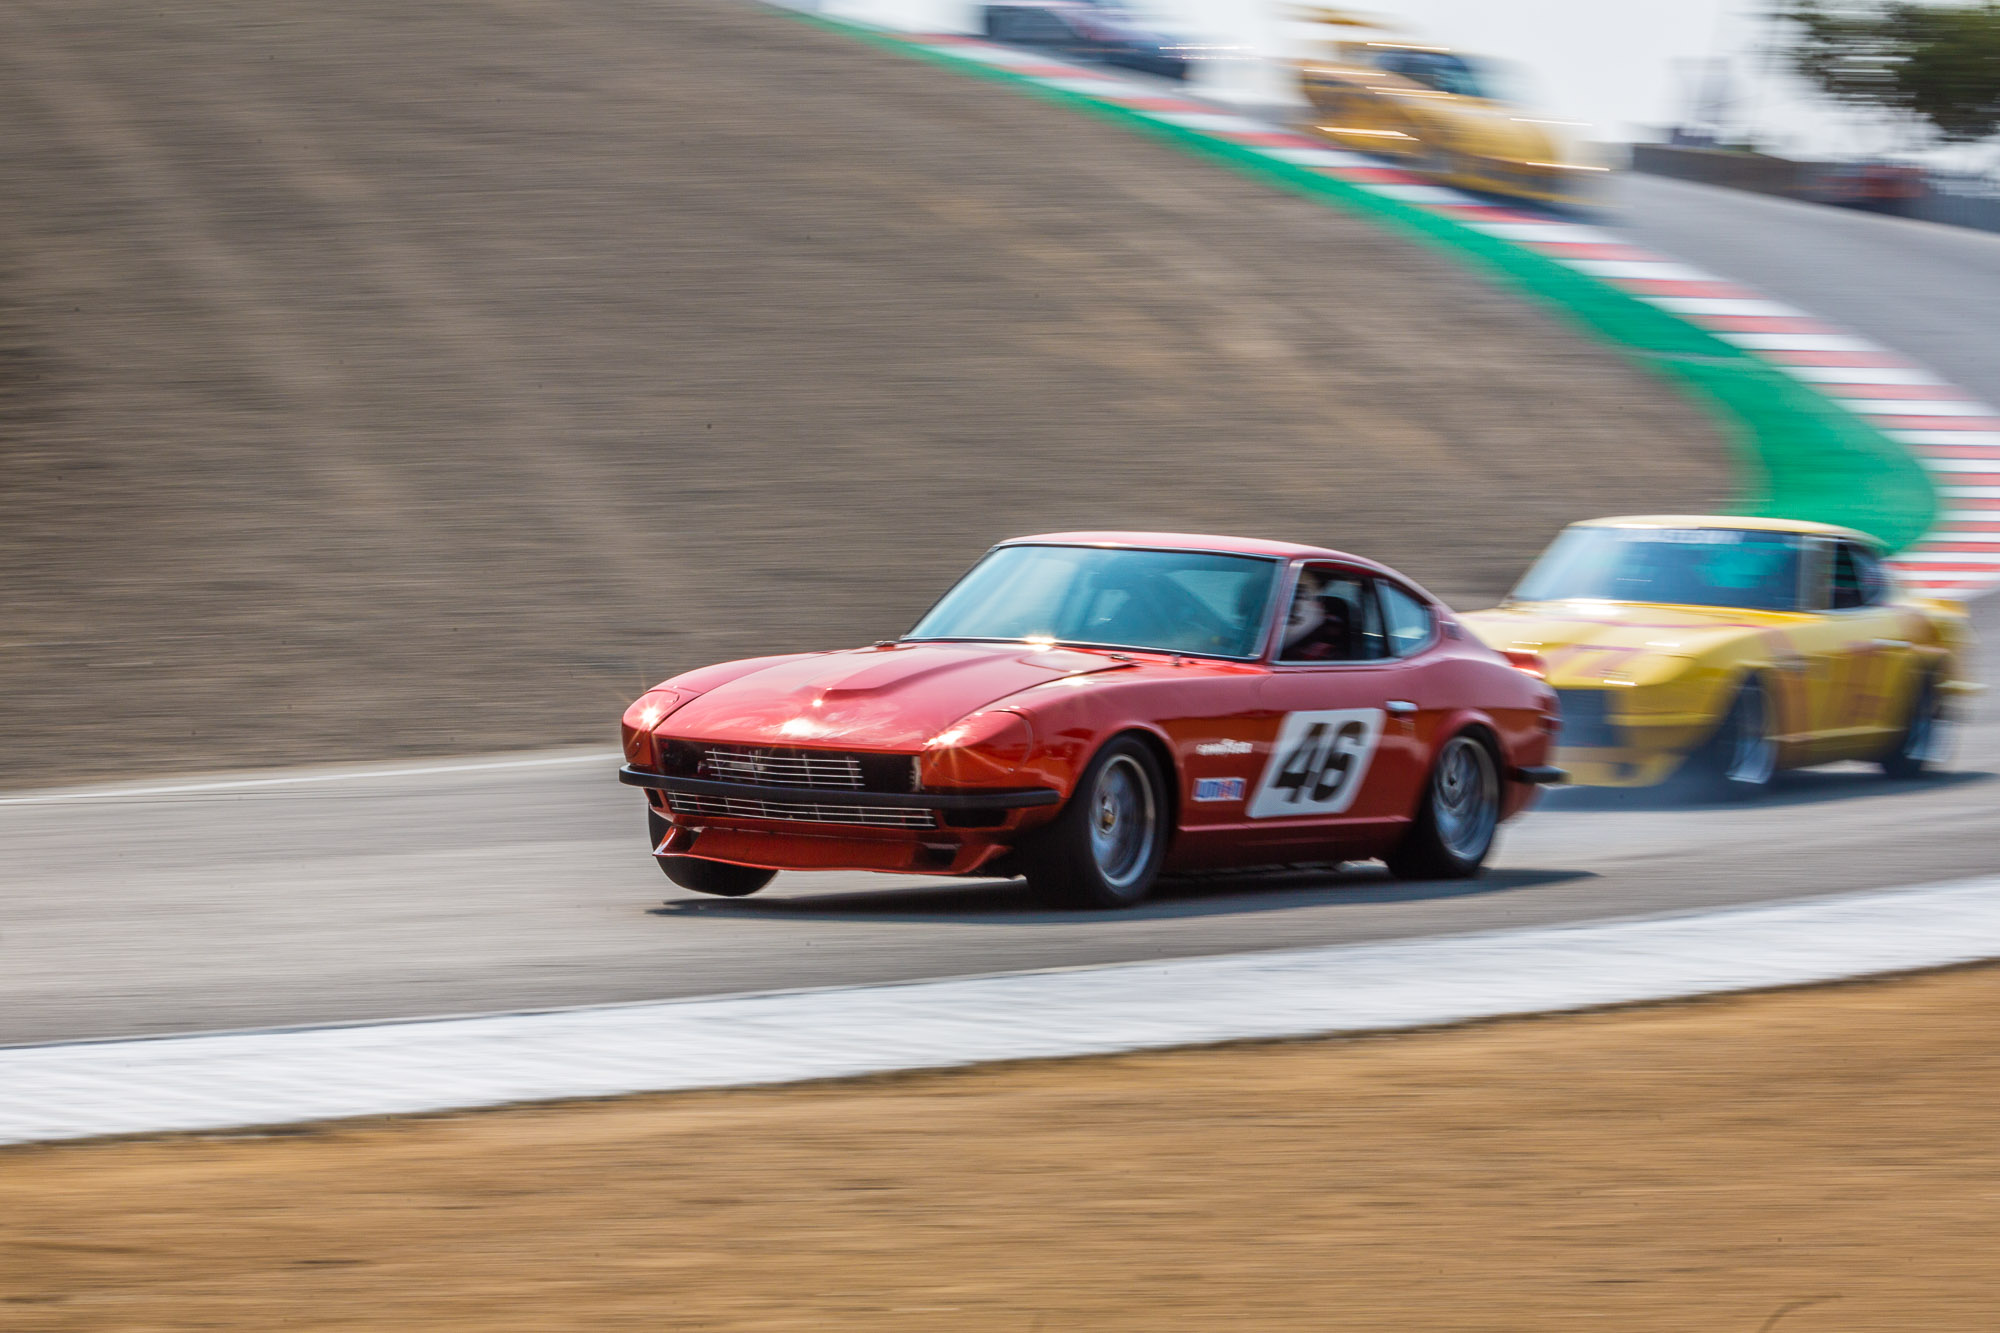  A Datsun 240Z at the Rolex Monterey Motorsports Reunion drives through the corkscrew section at Laguna Seca in Salinas, Calif. on August 25, 2018. (Eric Kayne/AP Images for Nissan) 